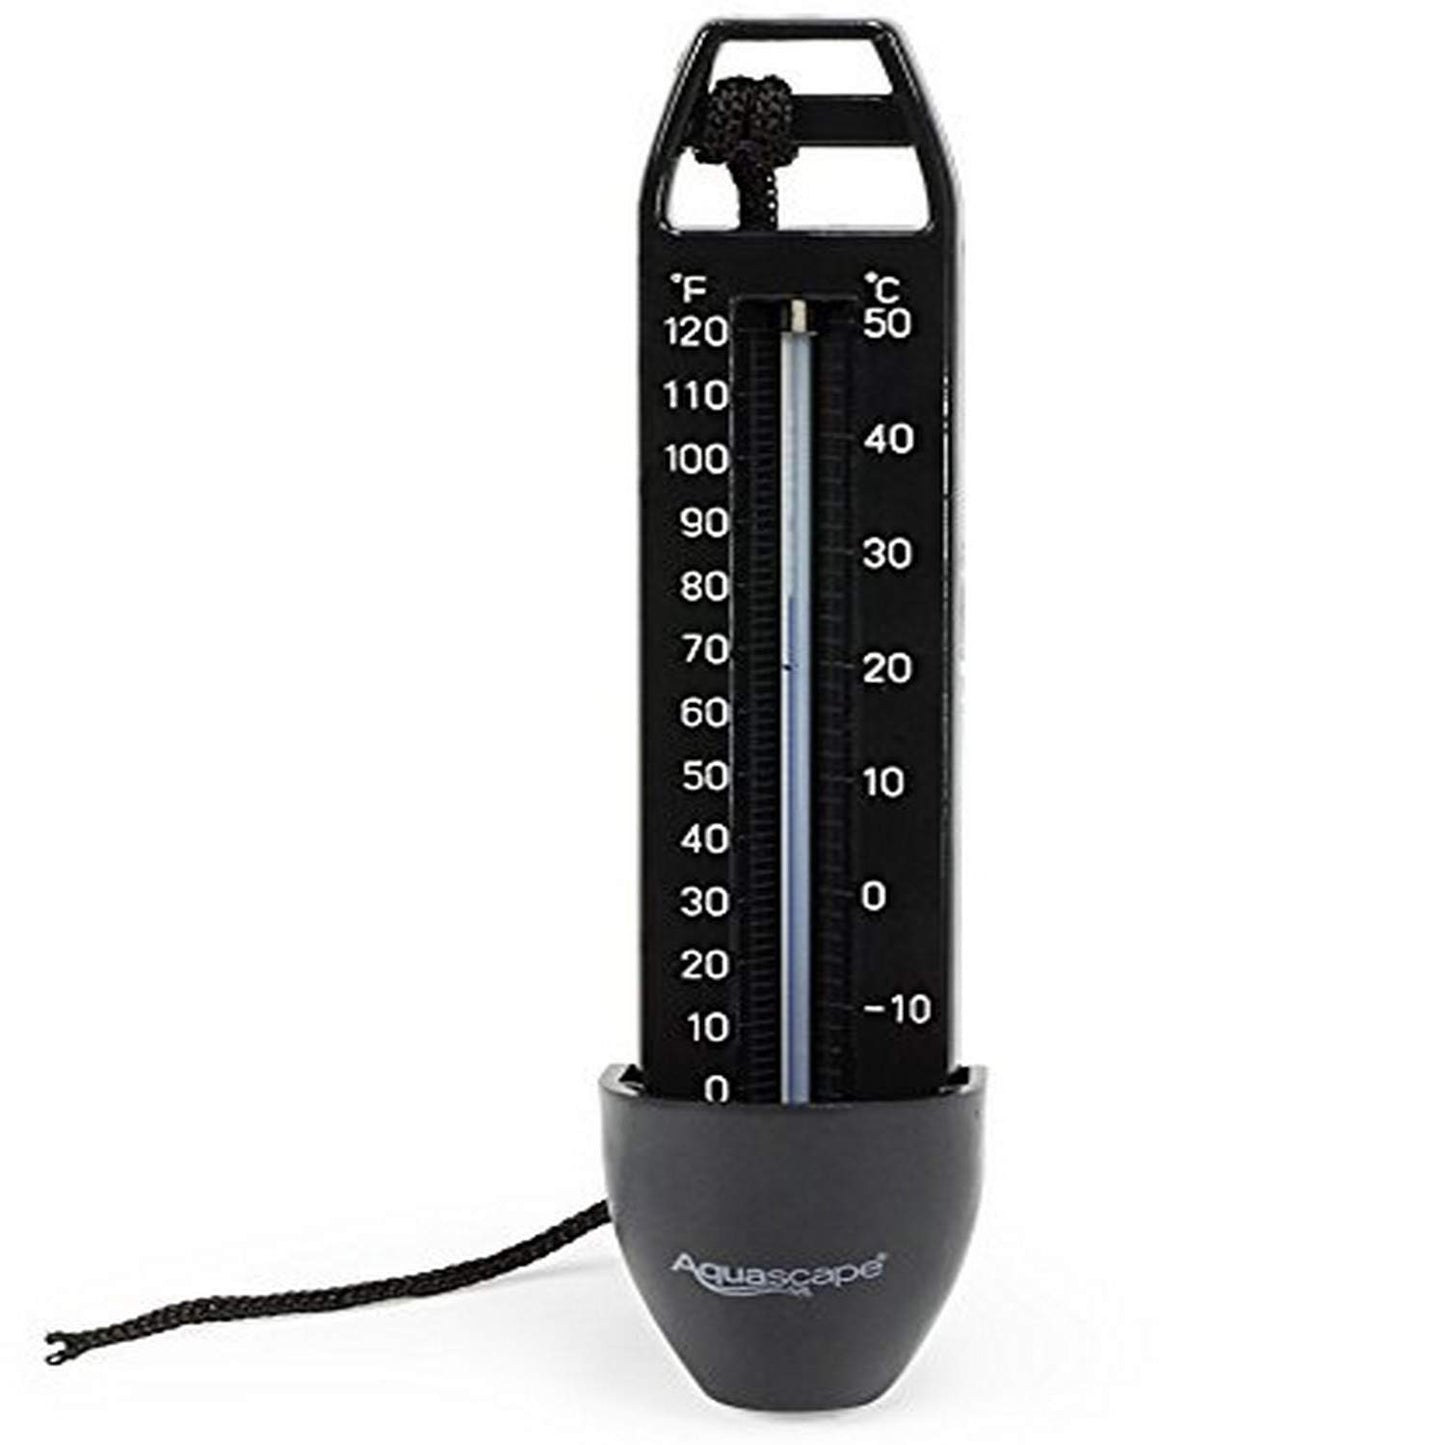 Aquascape Submersible Pond Thermometer